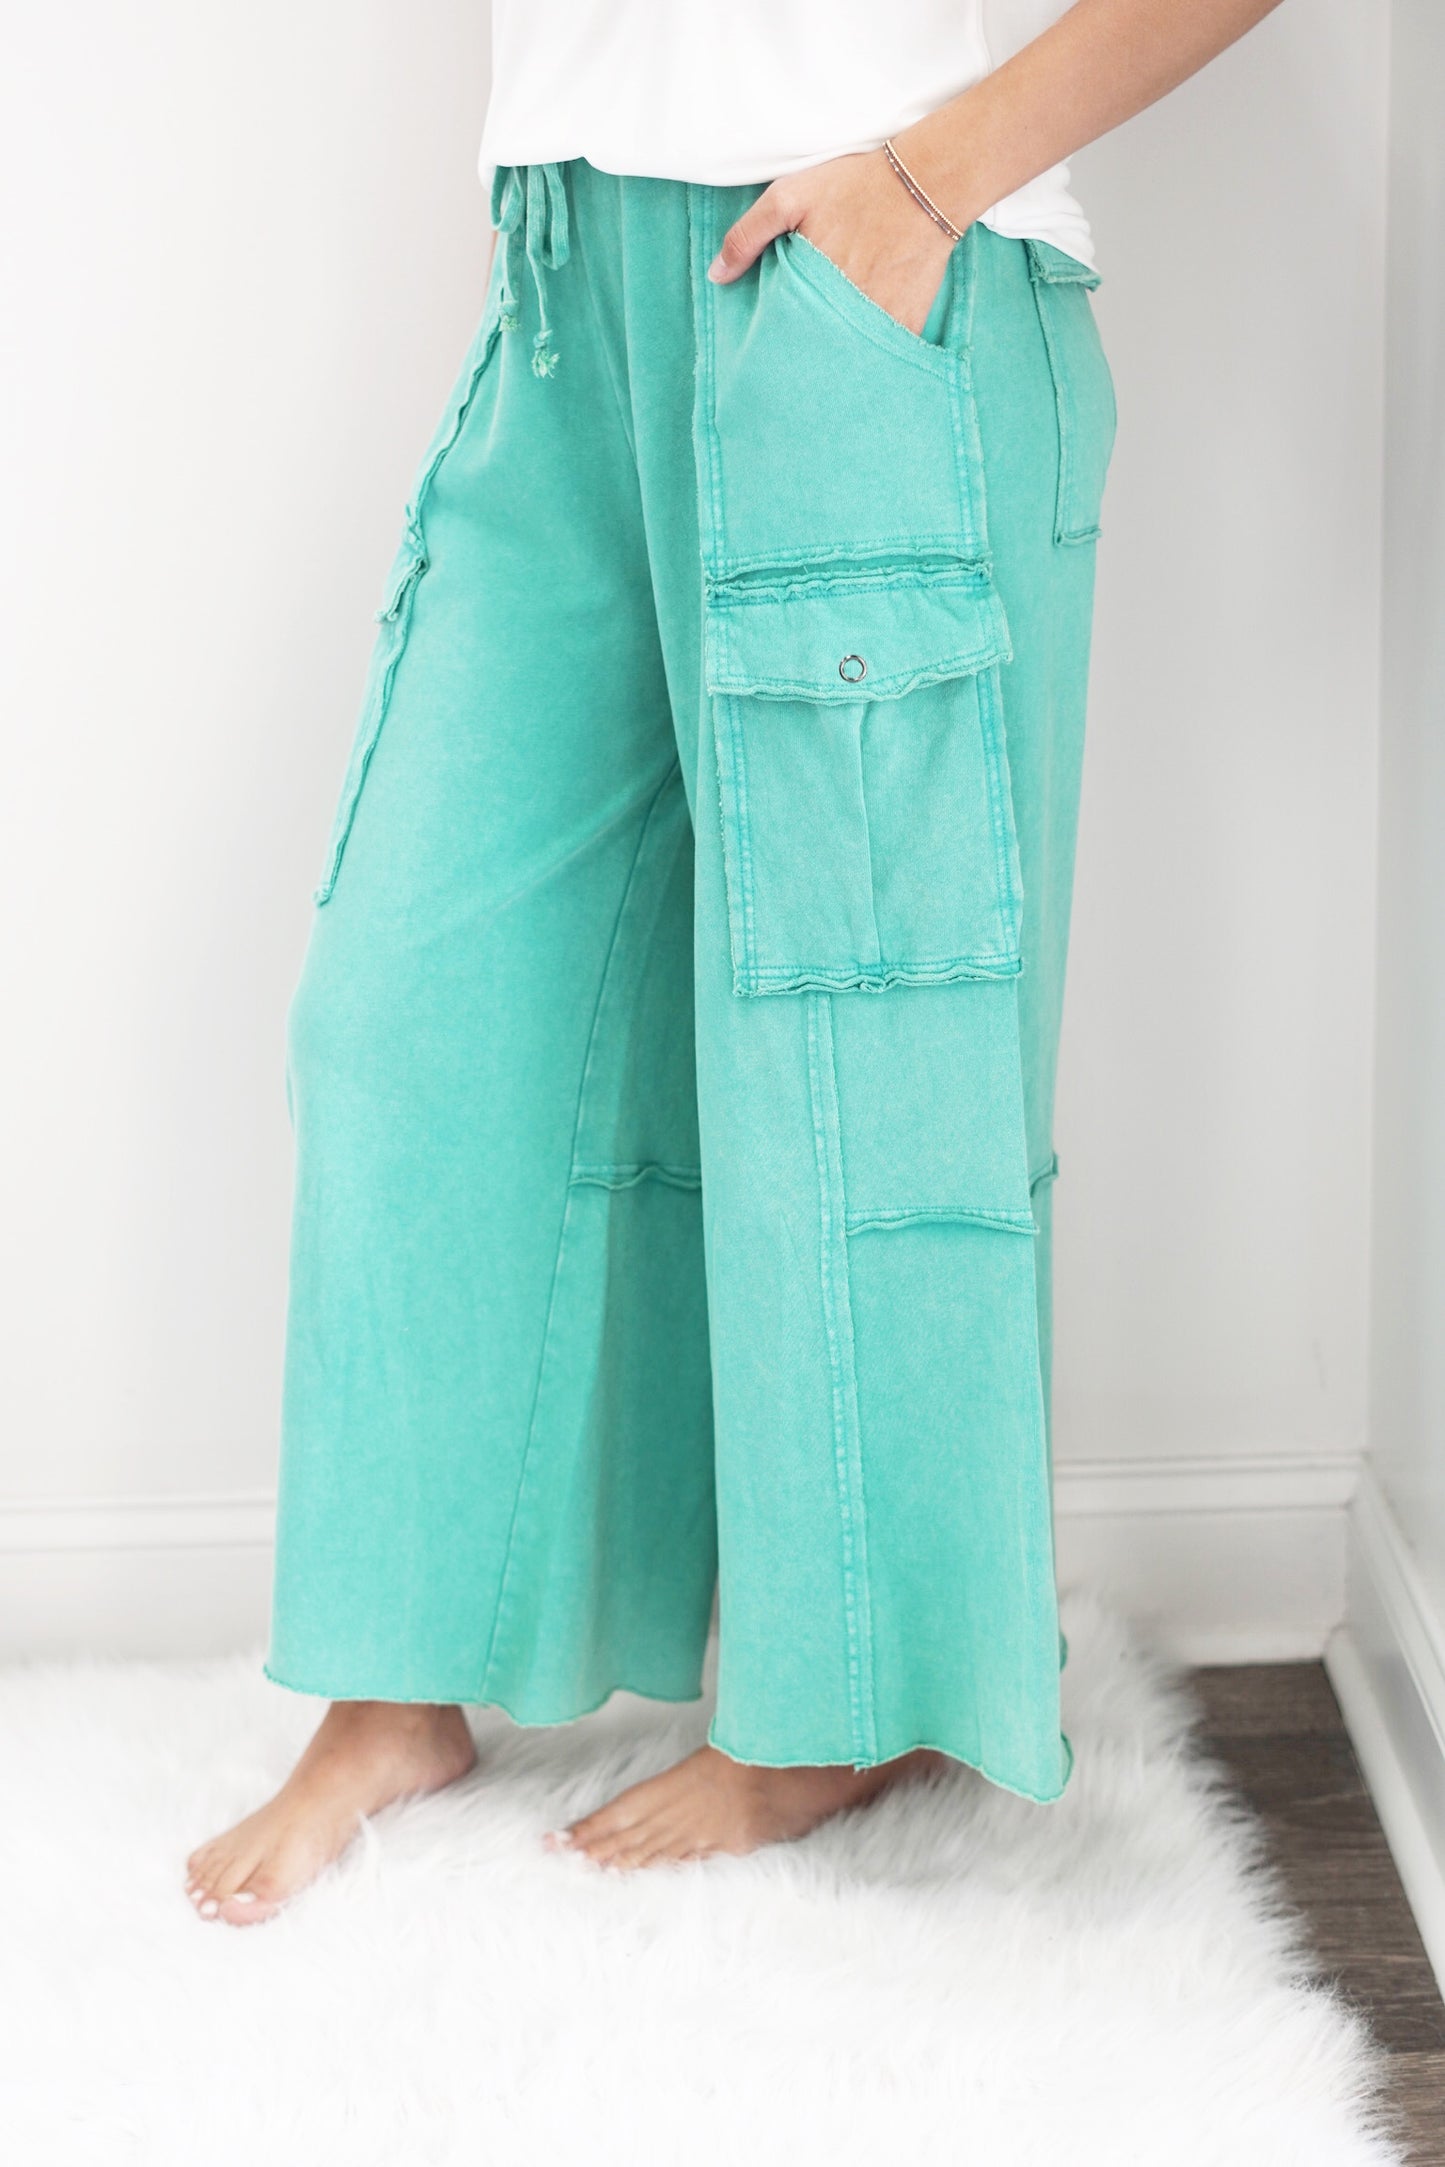 Audrey Mineral Washed Wide Leg Pants Waistband tie Cropped Leg 2 front and 2 back button pockets Atlantis Green 100% Cotton Hand Wash Cold, No Bleach, Hang to Dry Model is wearing a size small